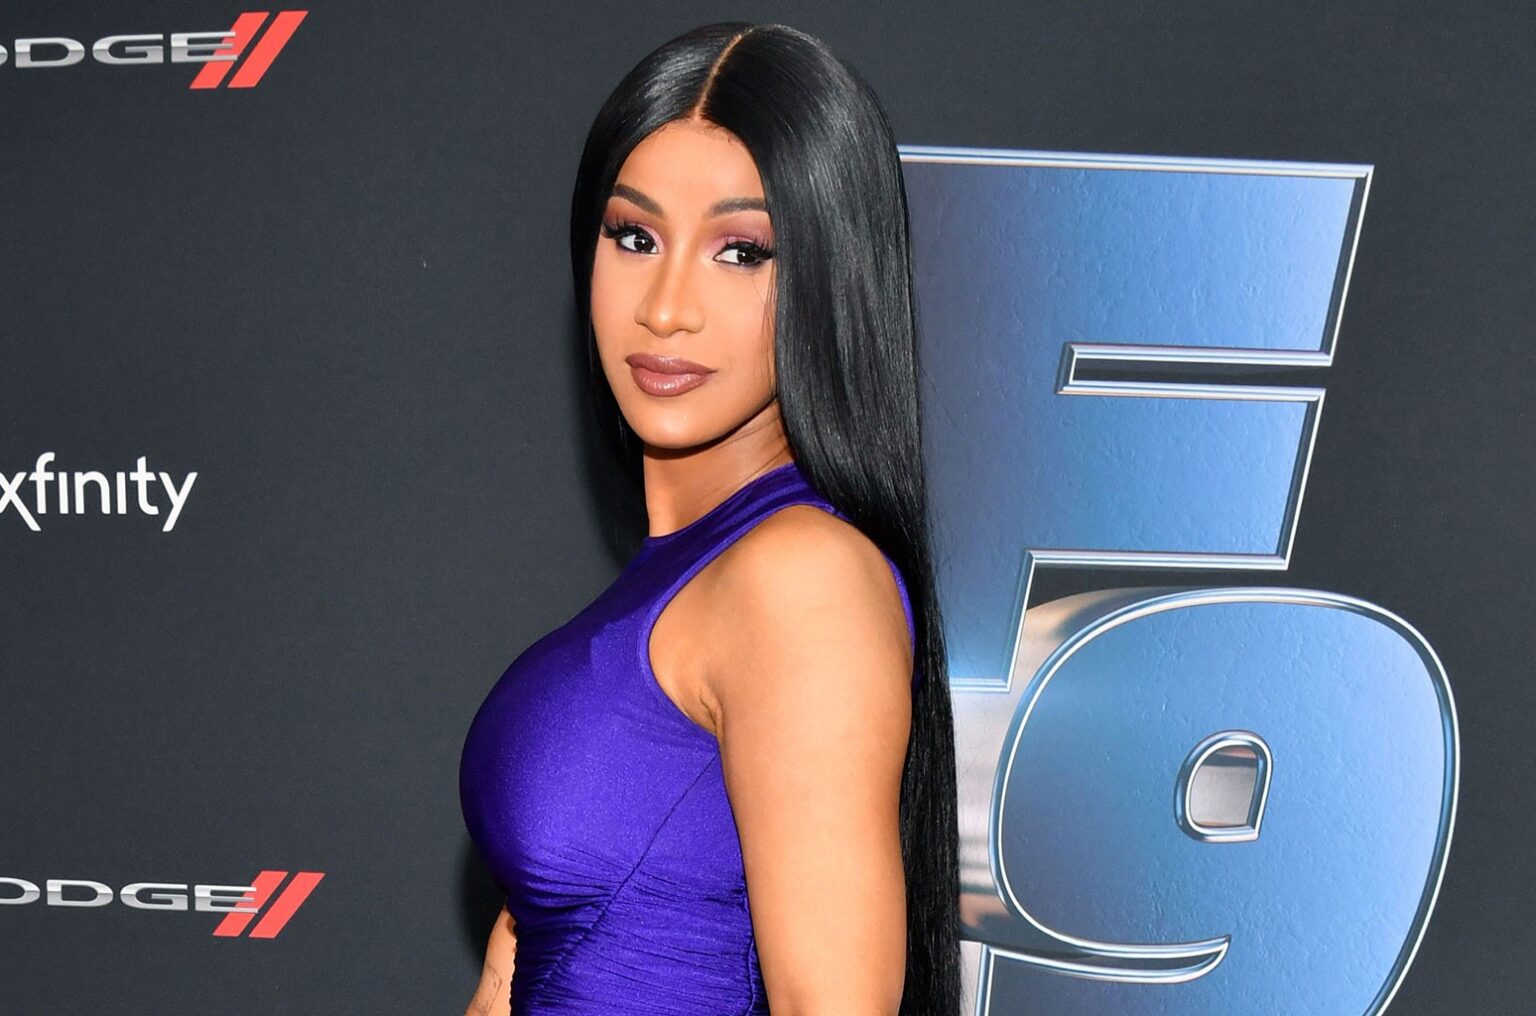 Cardi B shares a hair hack for extracting the benefits of onion in an ‘odorless’ manner